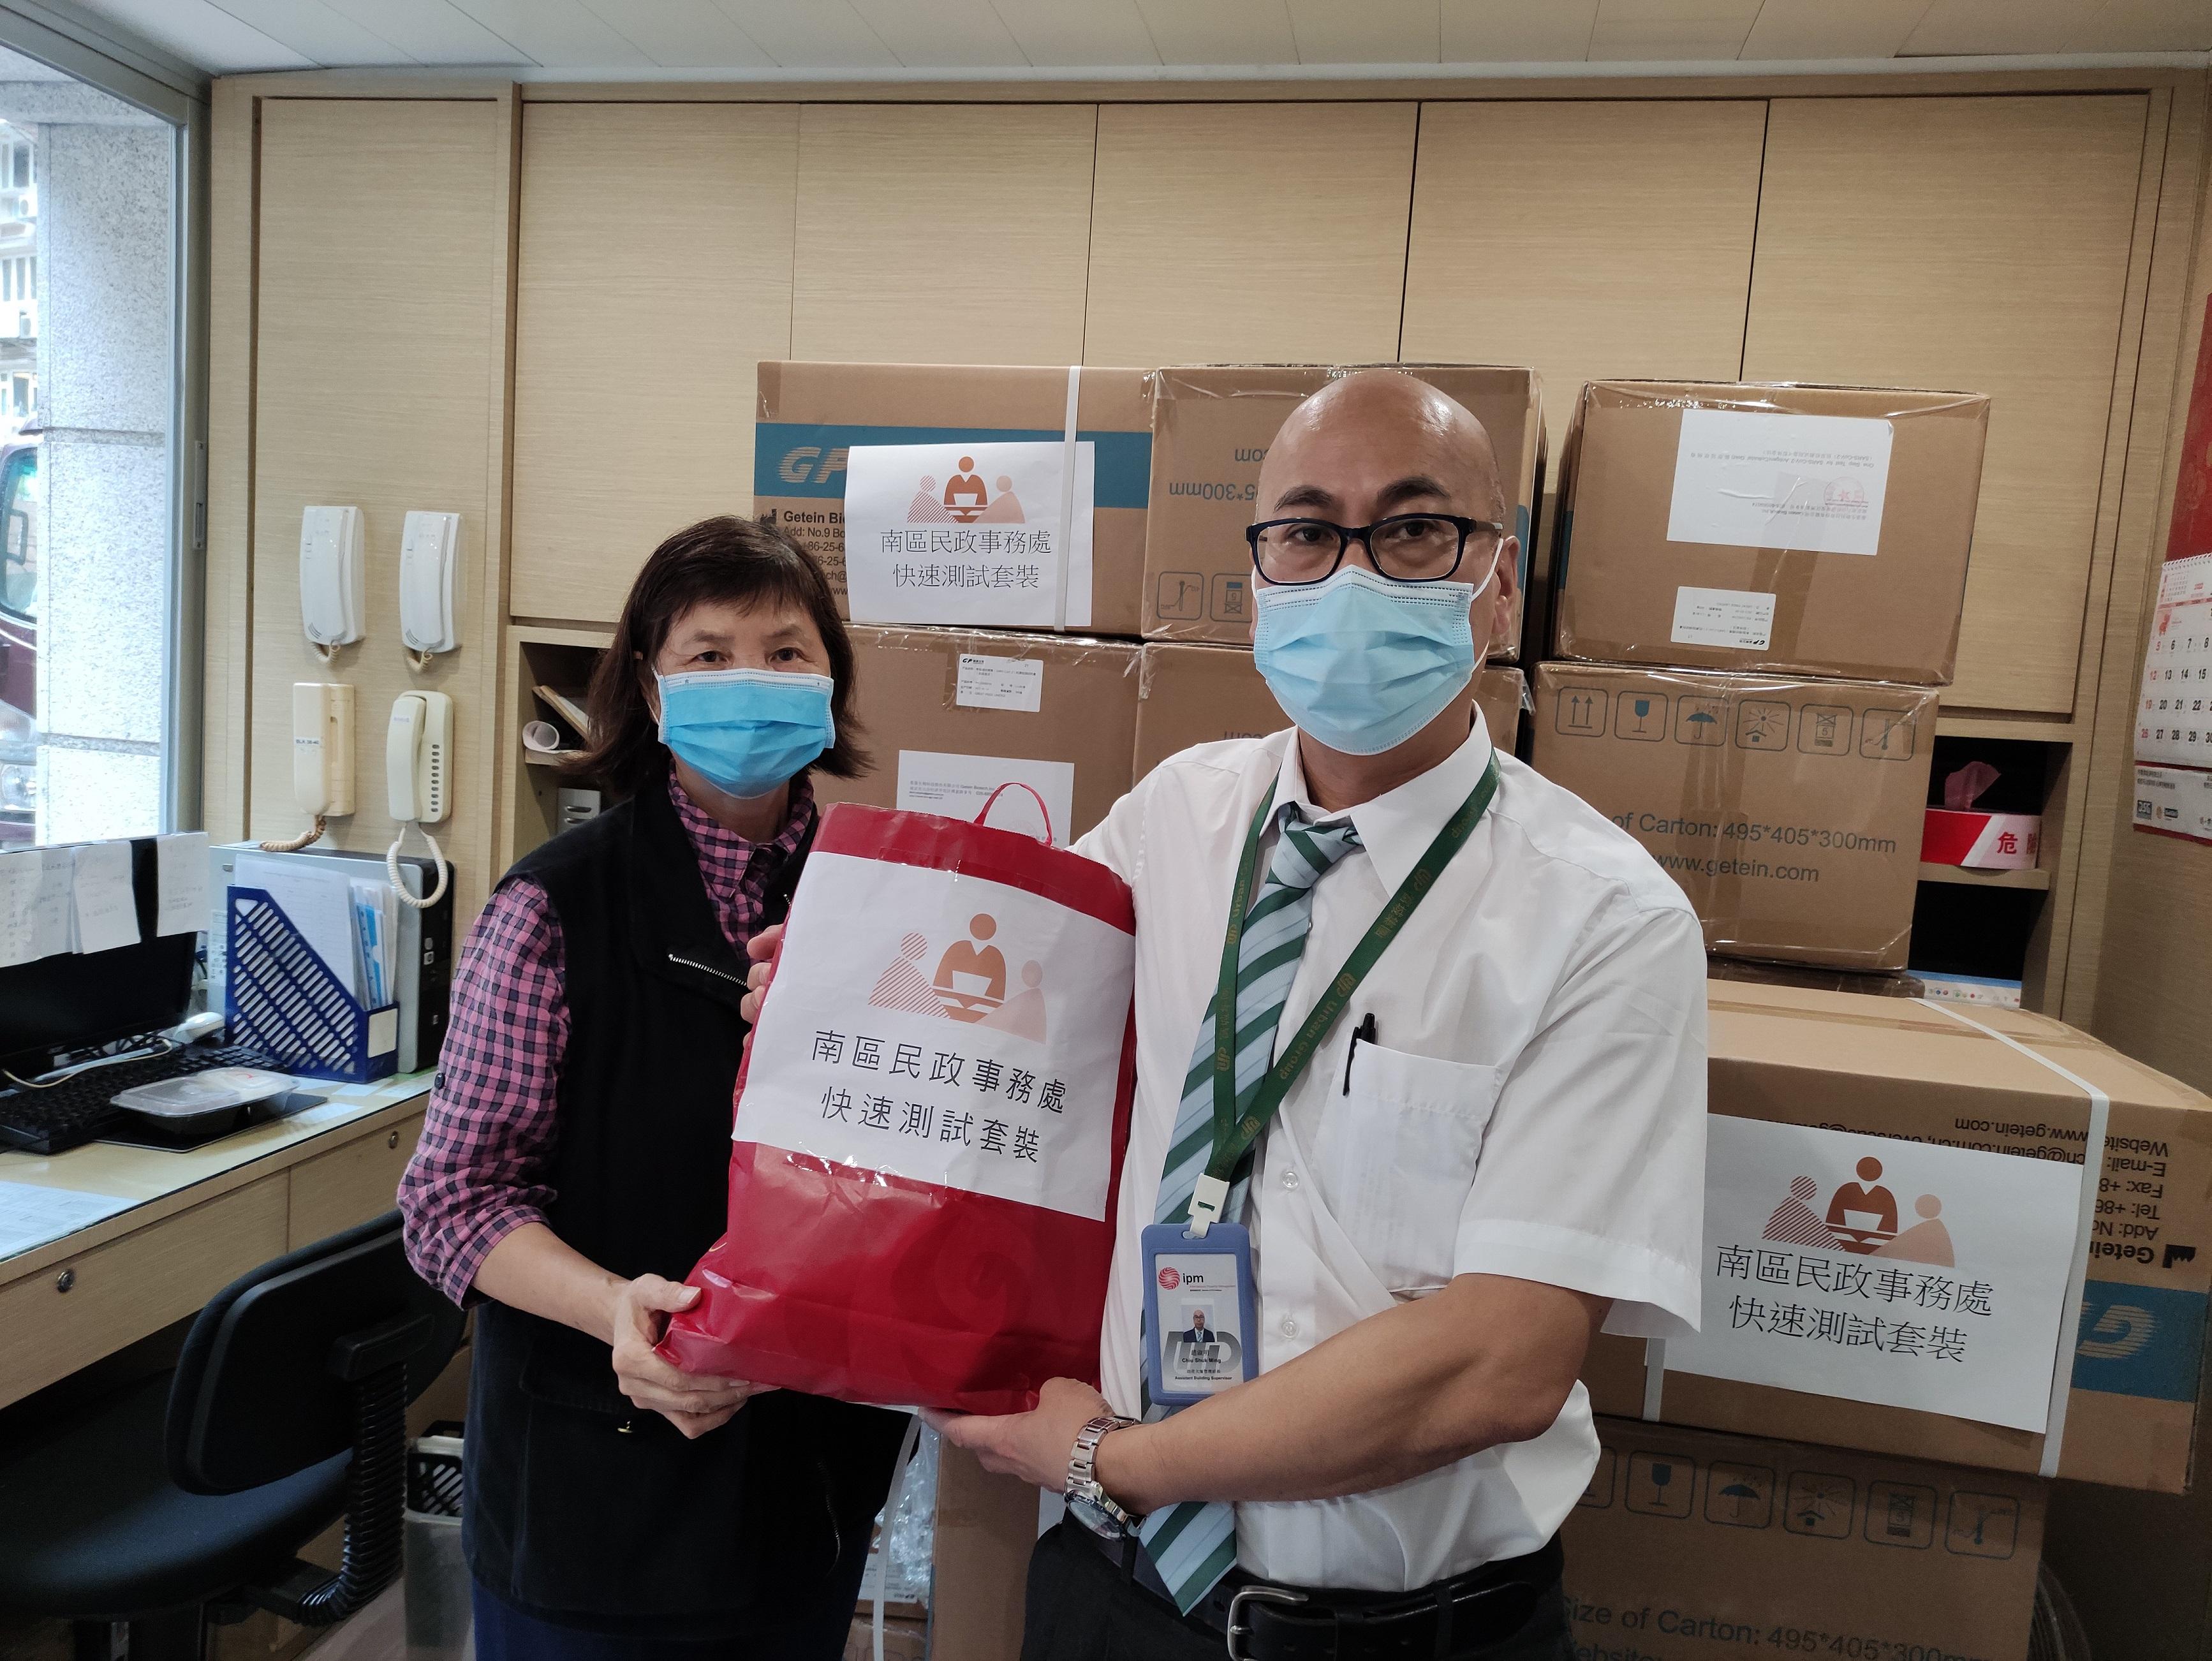 The Southern District Office today (June 10) distributed COVID-19 rapid test kits to households, cleansing workers and property management staff living and working in Pokfulam Gardens for voluntary testing through the property management company.

